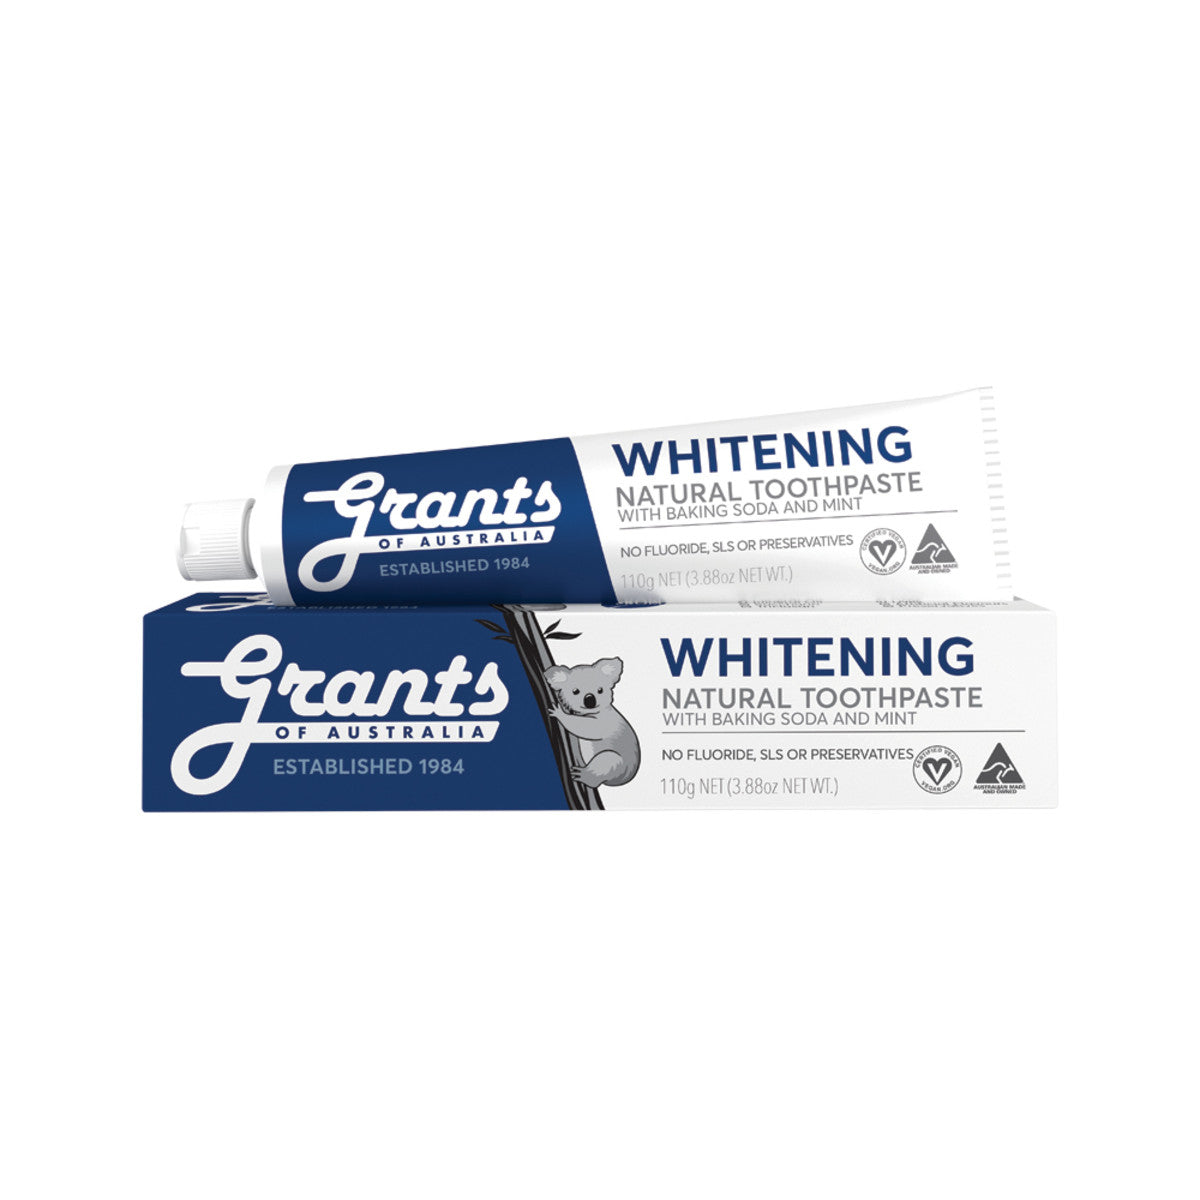 Grants - Natural Toothpaste (Whitening with Baking Soda & Mint, Fluoride Free)